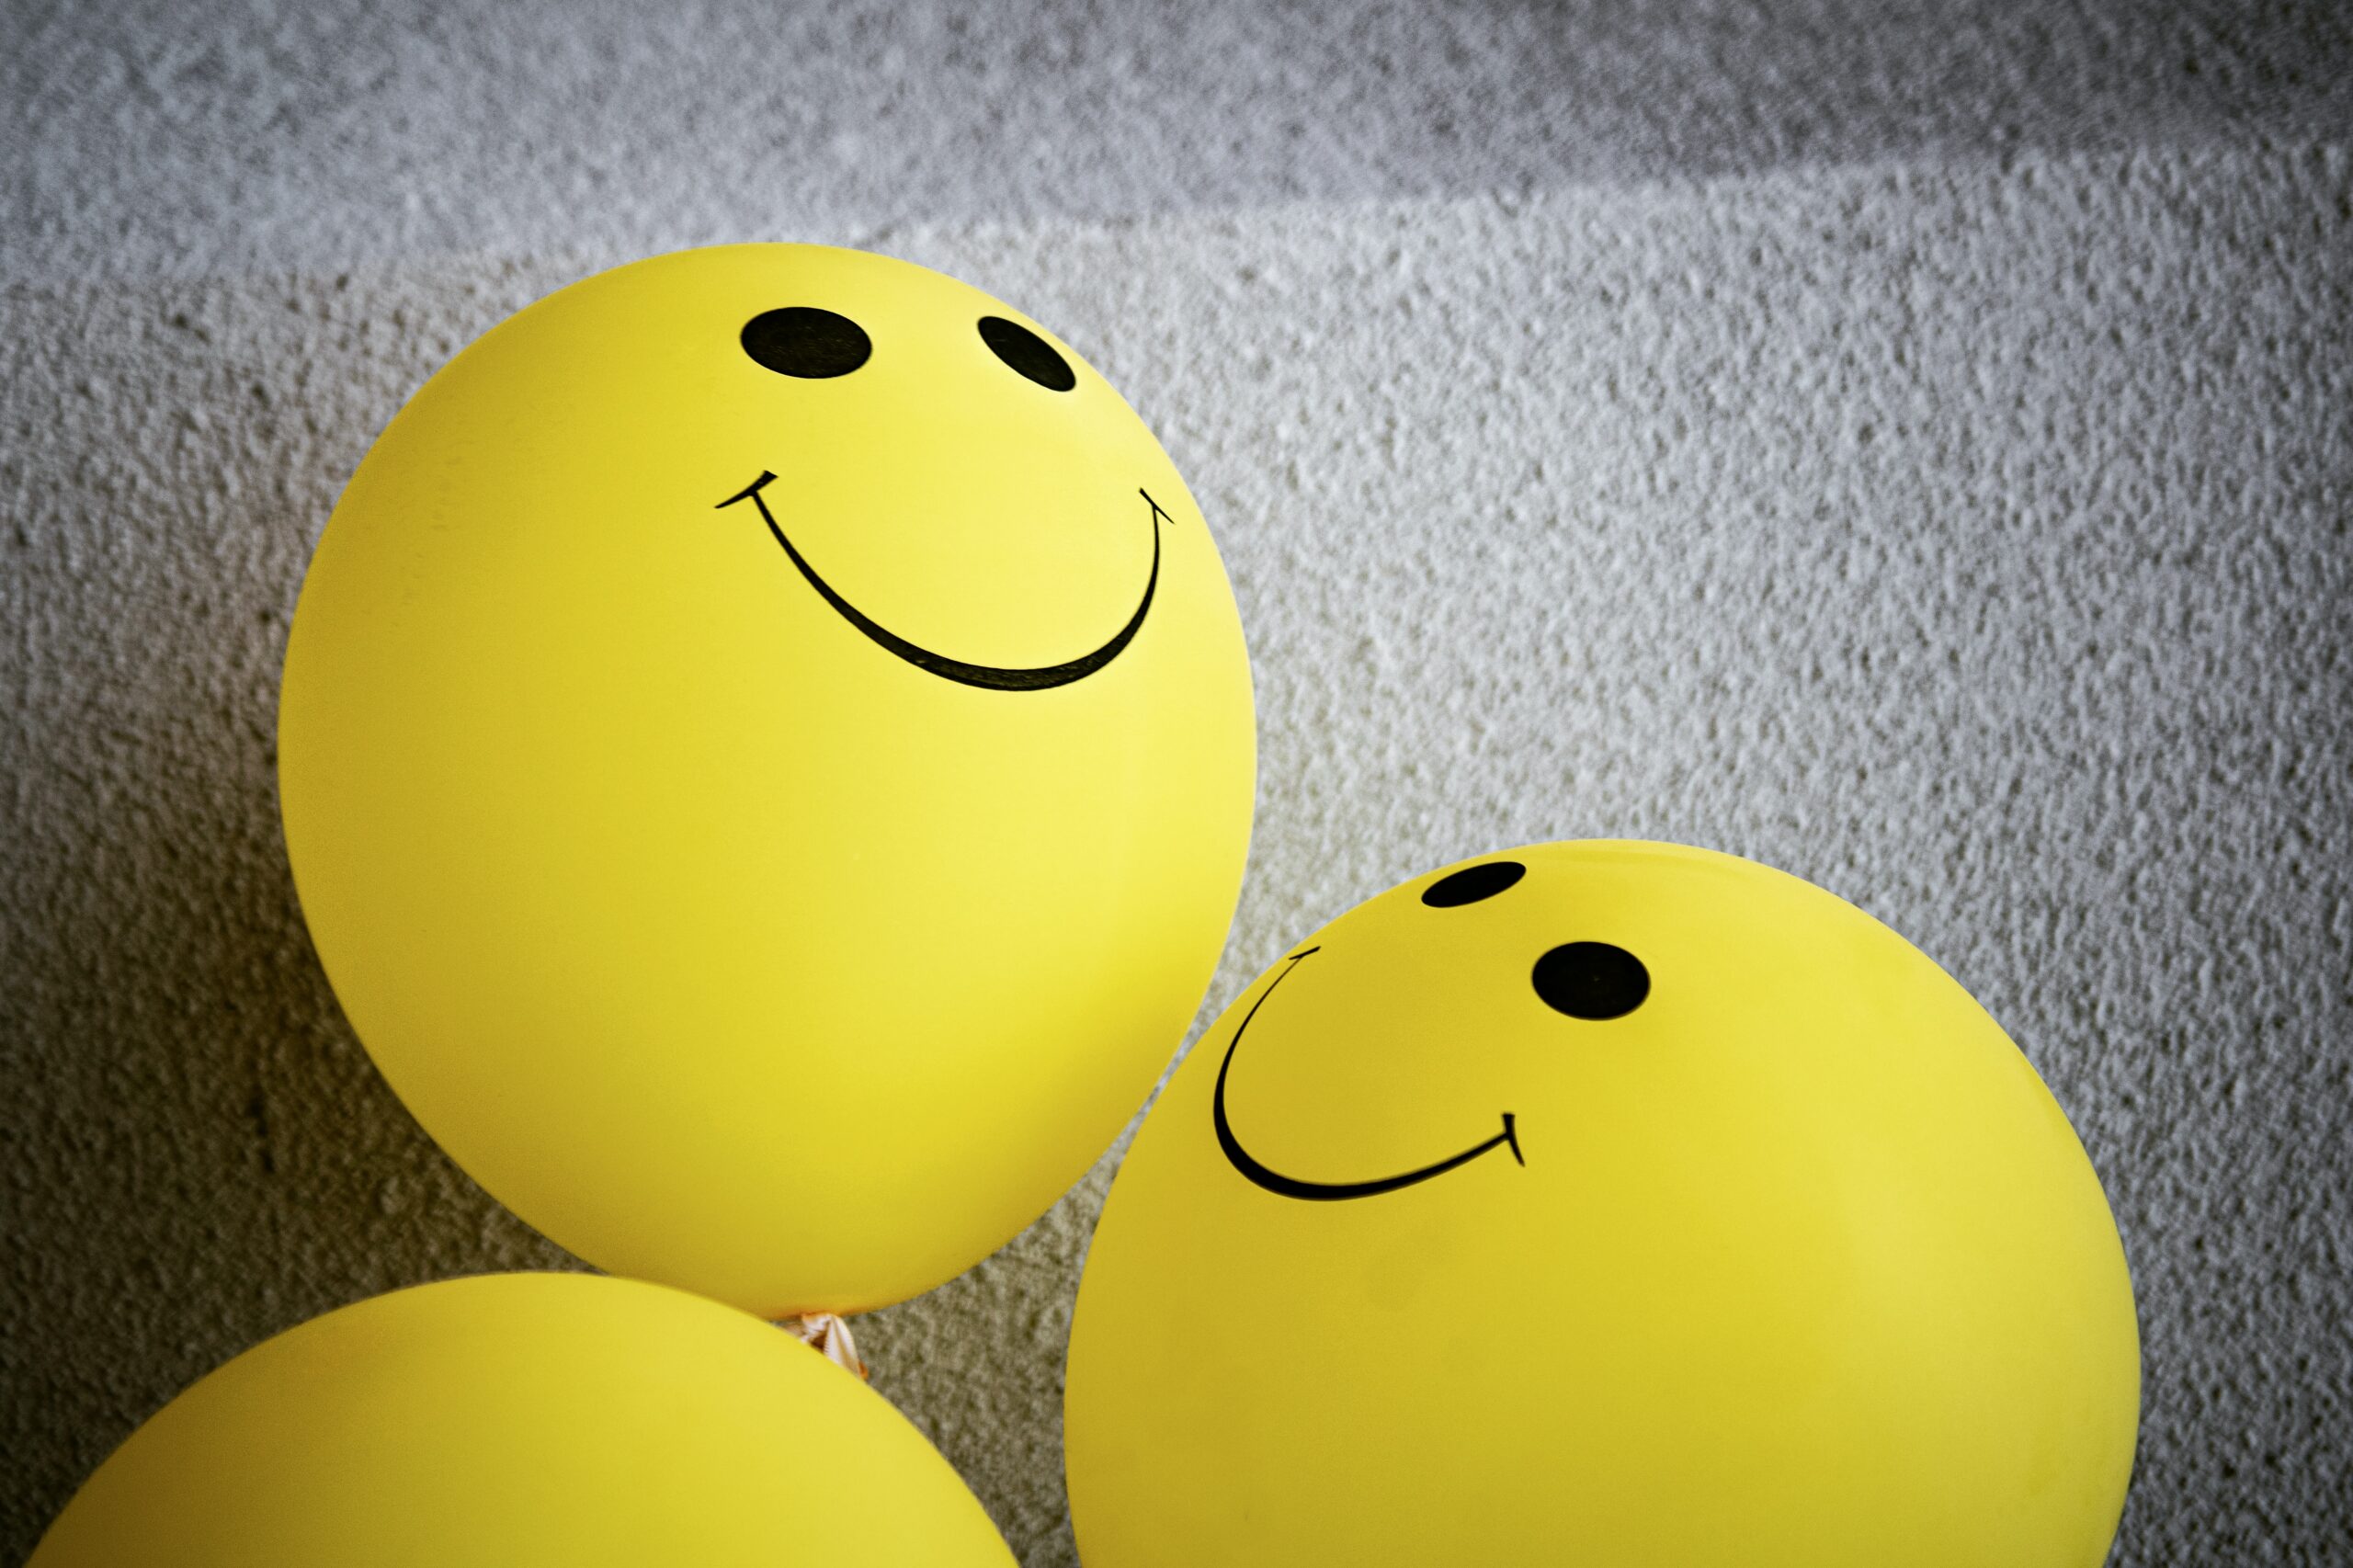 three yellow balloons with smiley faces